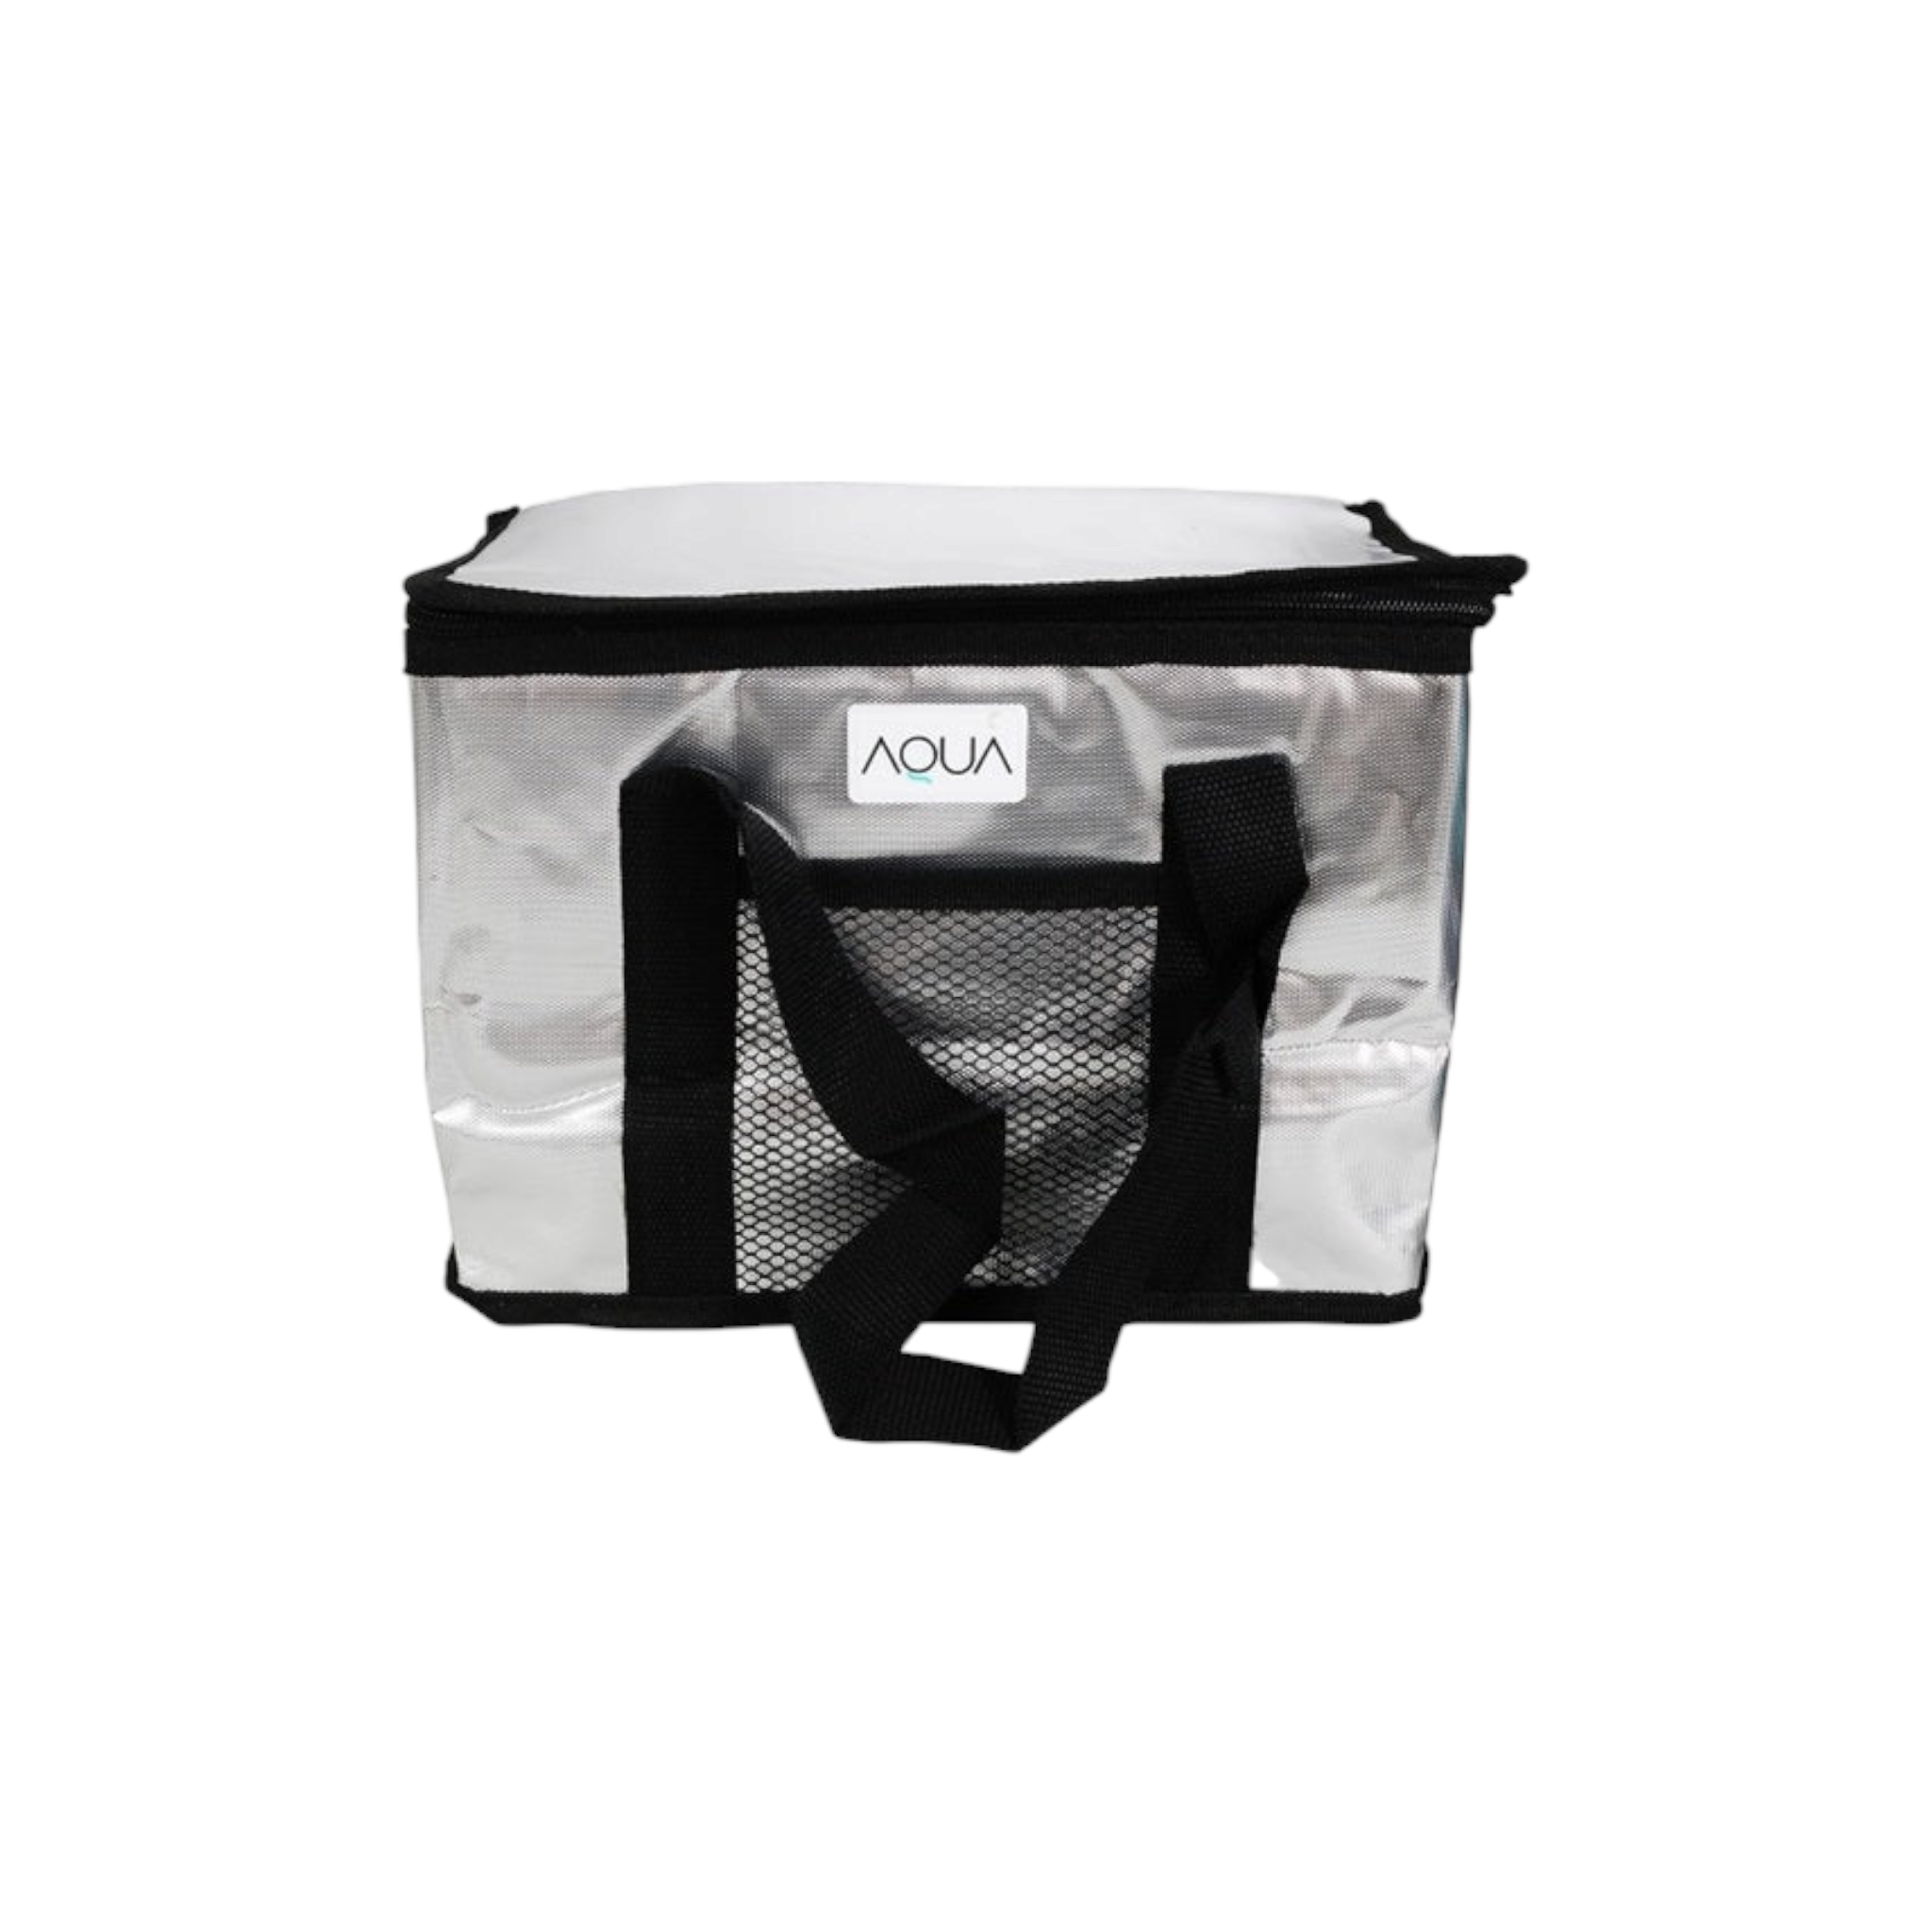 Aqua 8L Insulated Thermal Cooler Lunch Bag 34508